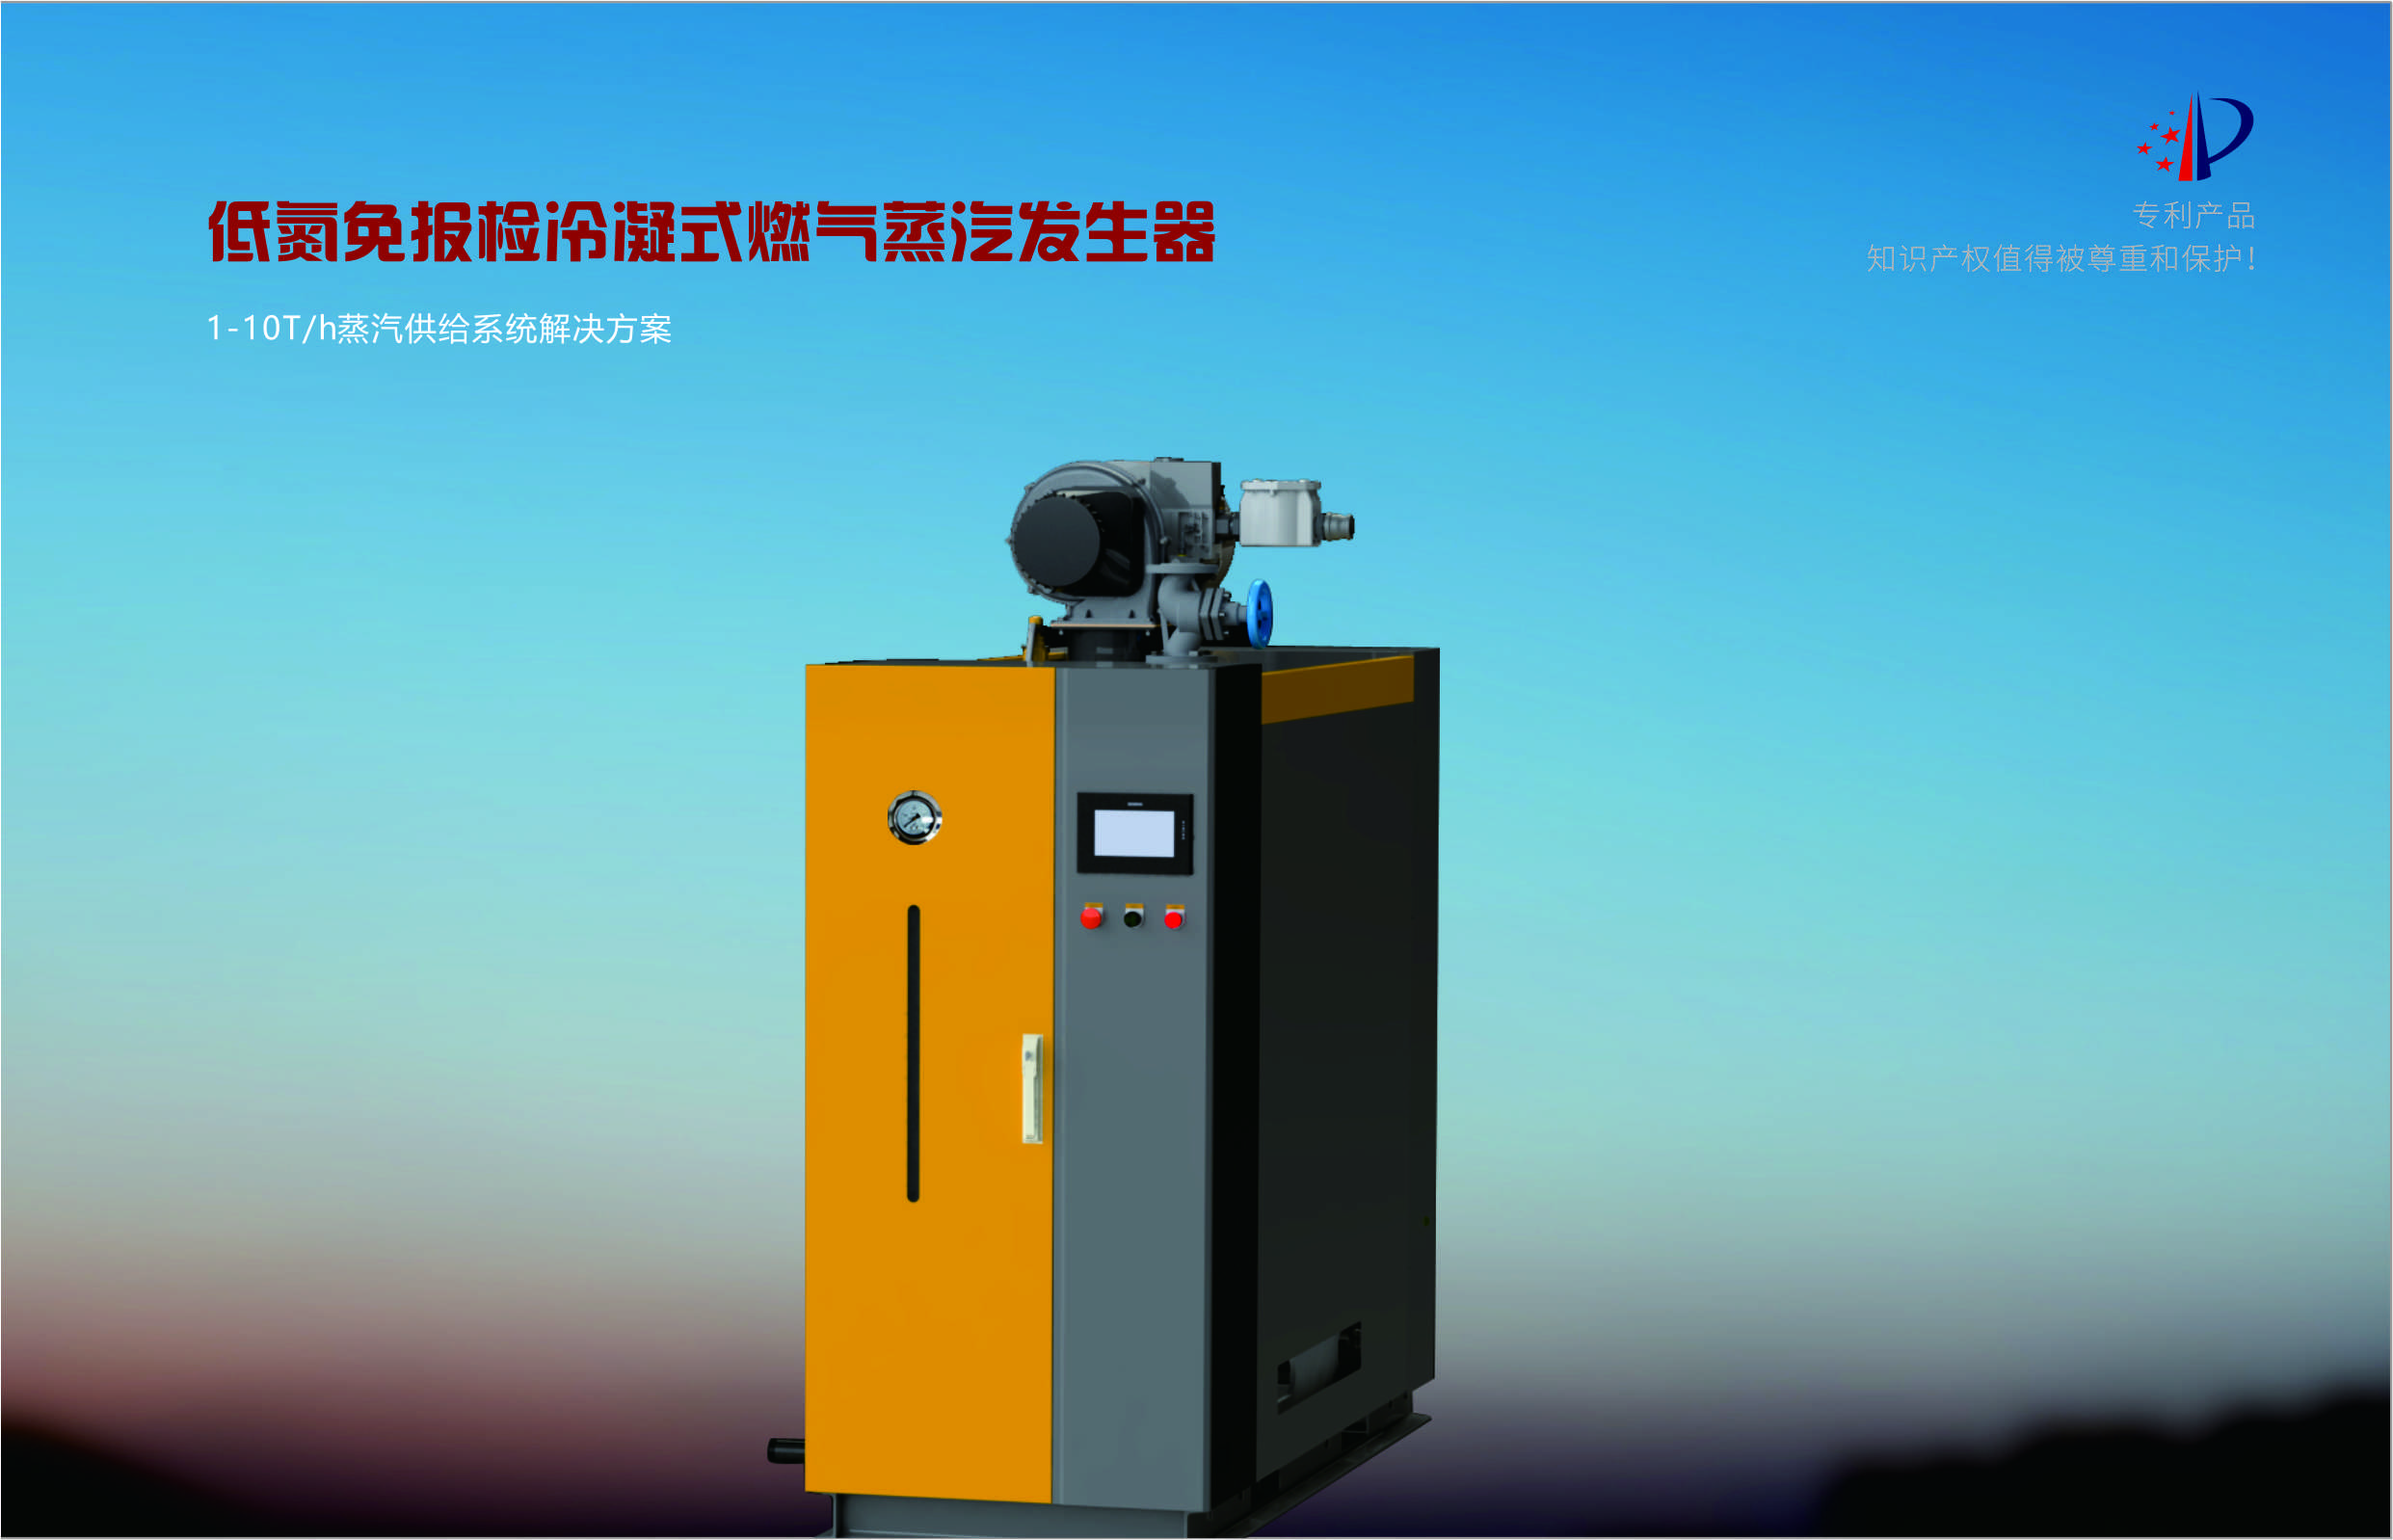 0.3-1 ton gas steam generator, fully automatic steam boiler, inspection free washing, chemical disinfection boiler